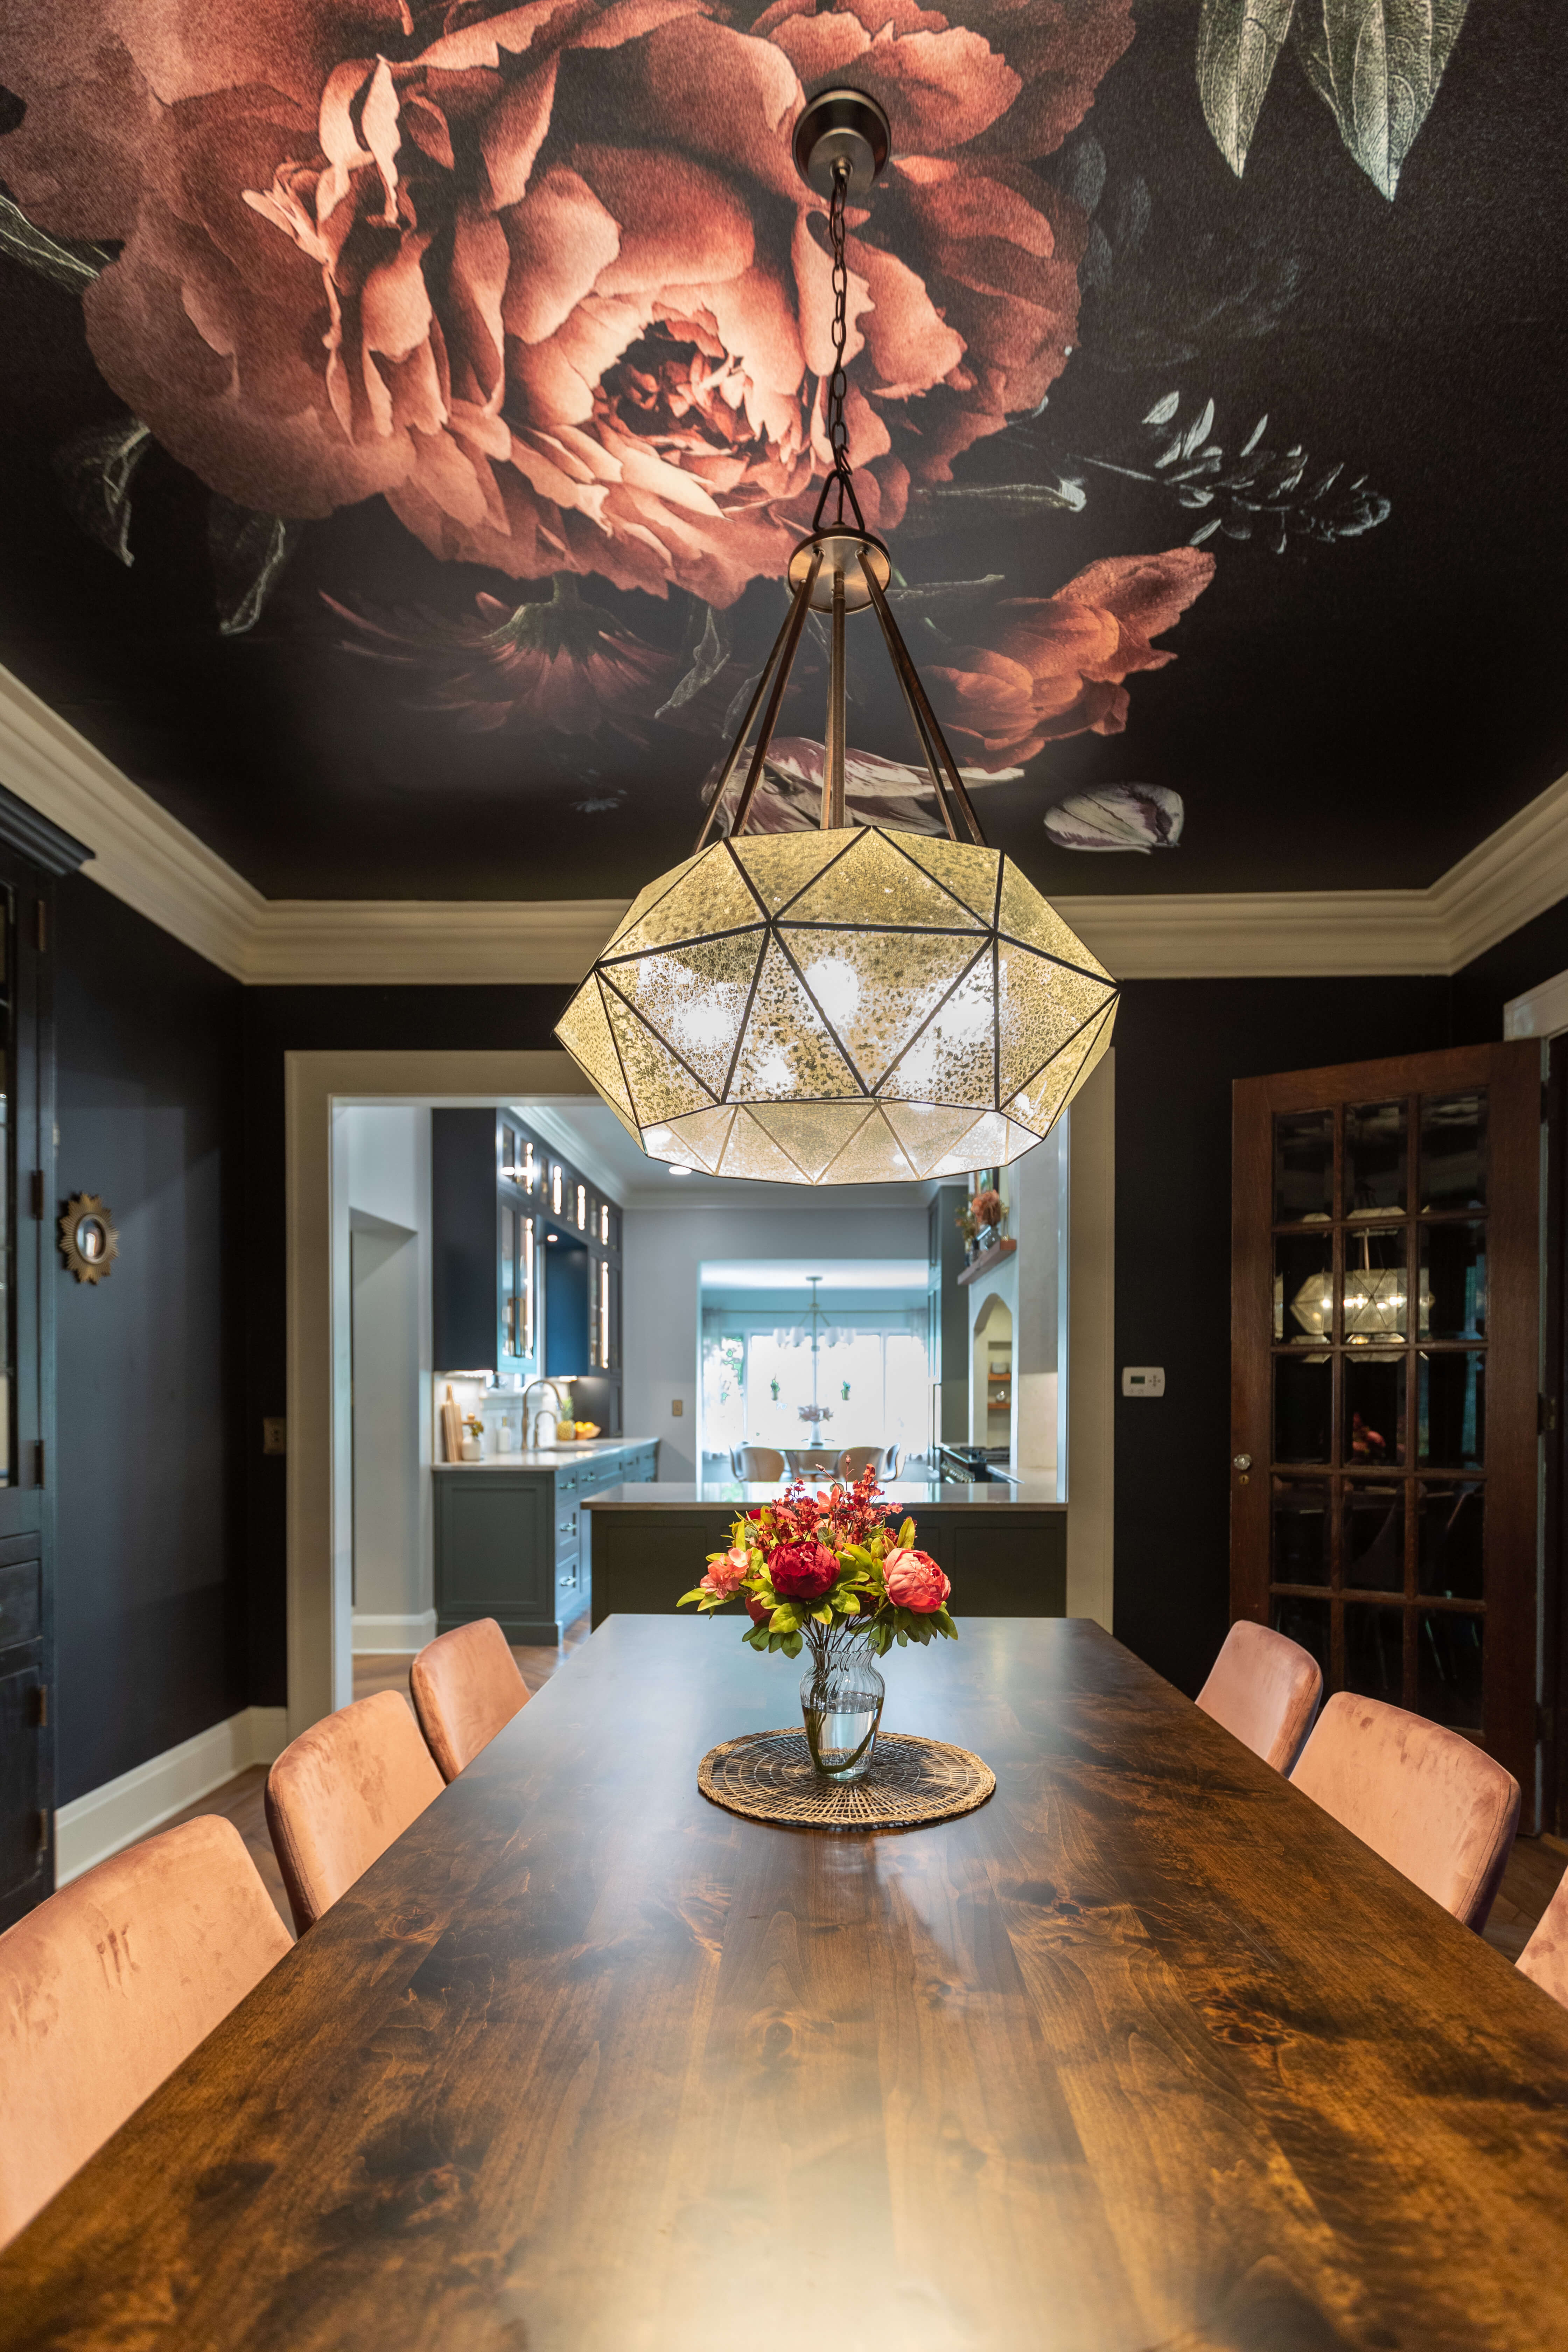 A dining room with a dramatic and bold mural painted on the ceiling of a rose.